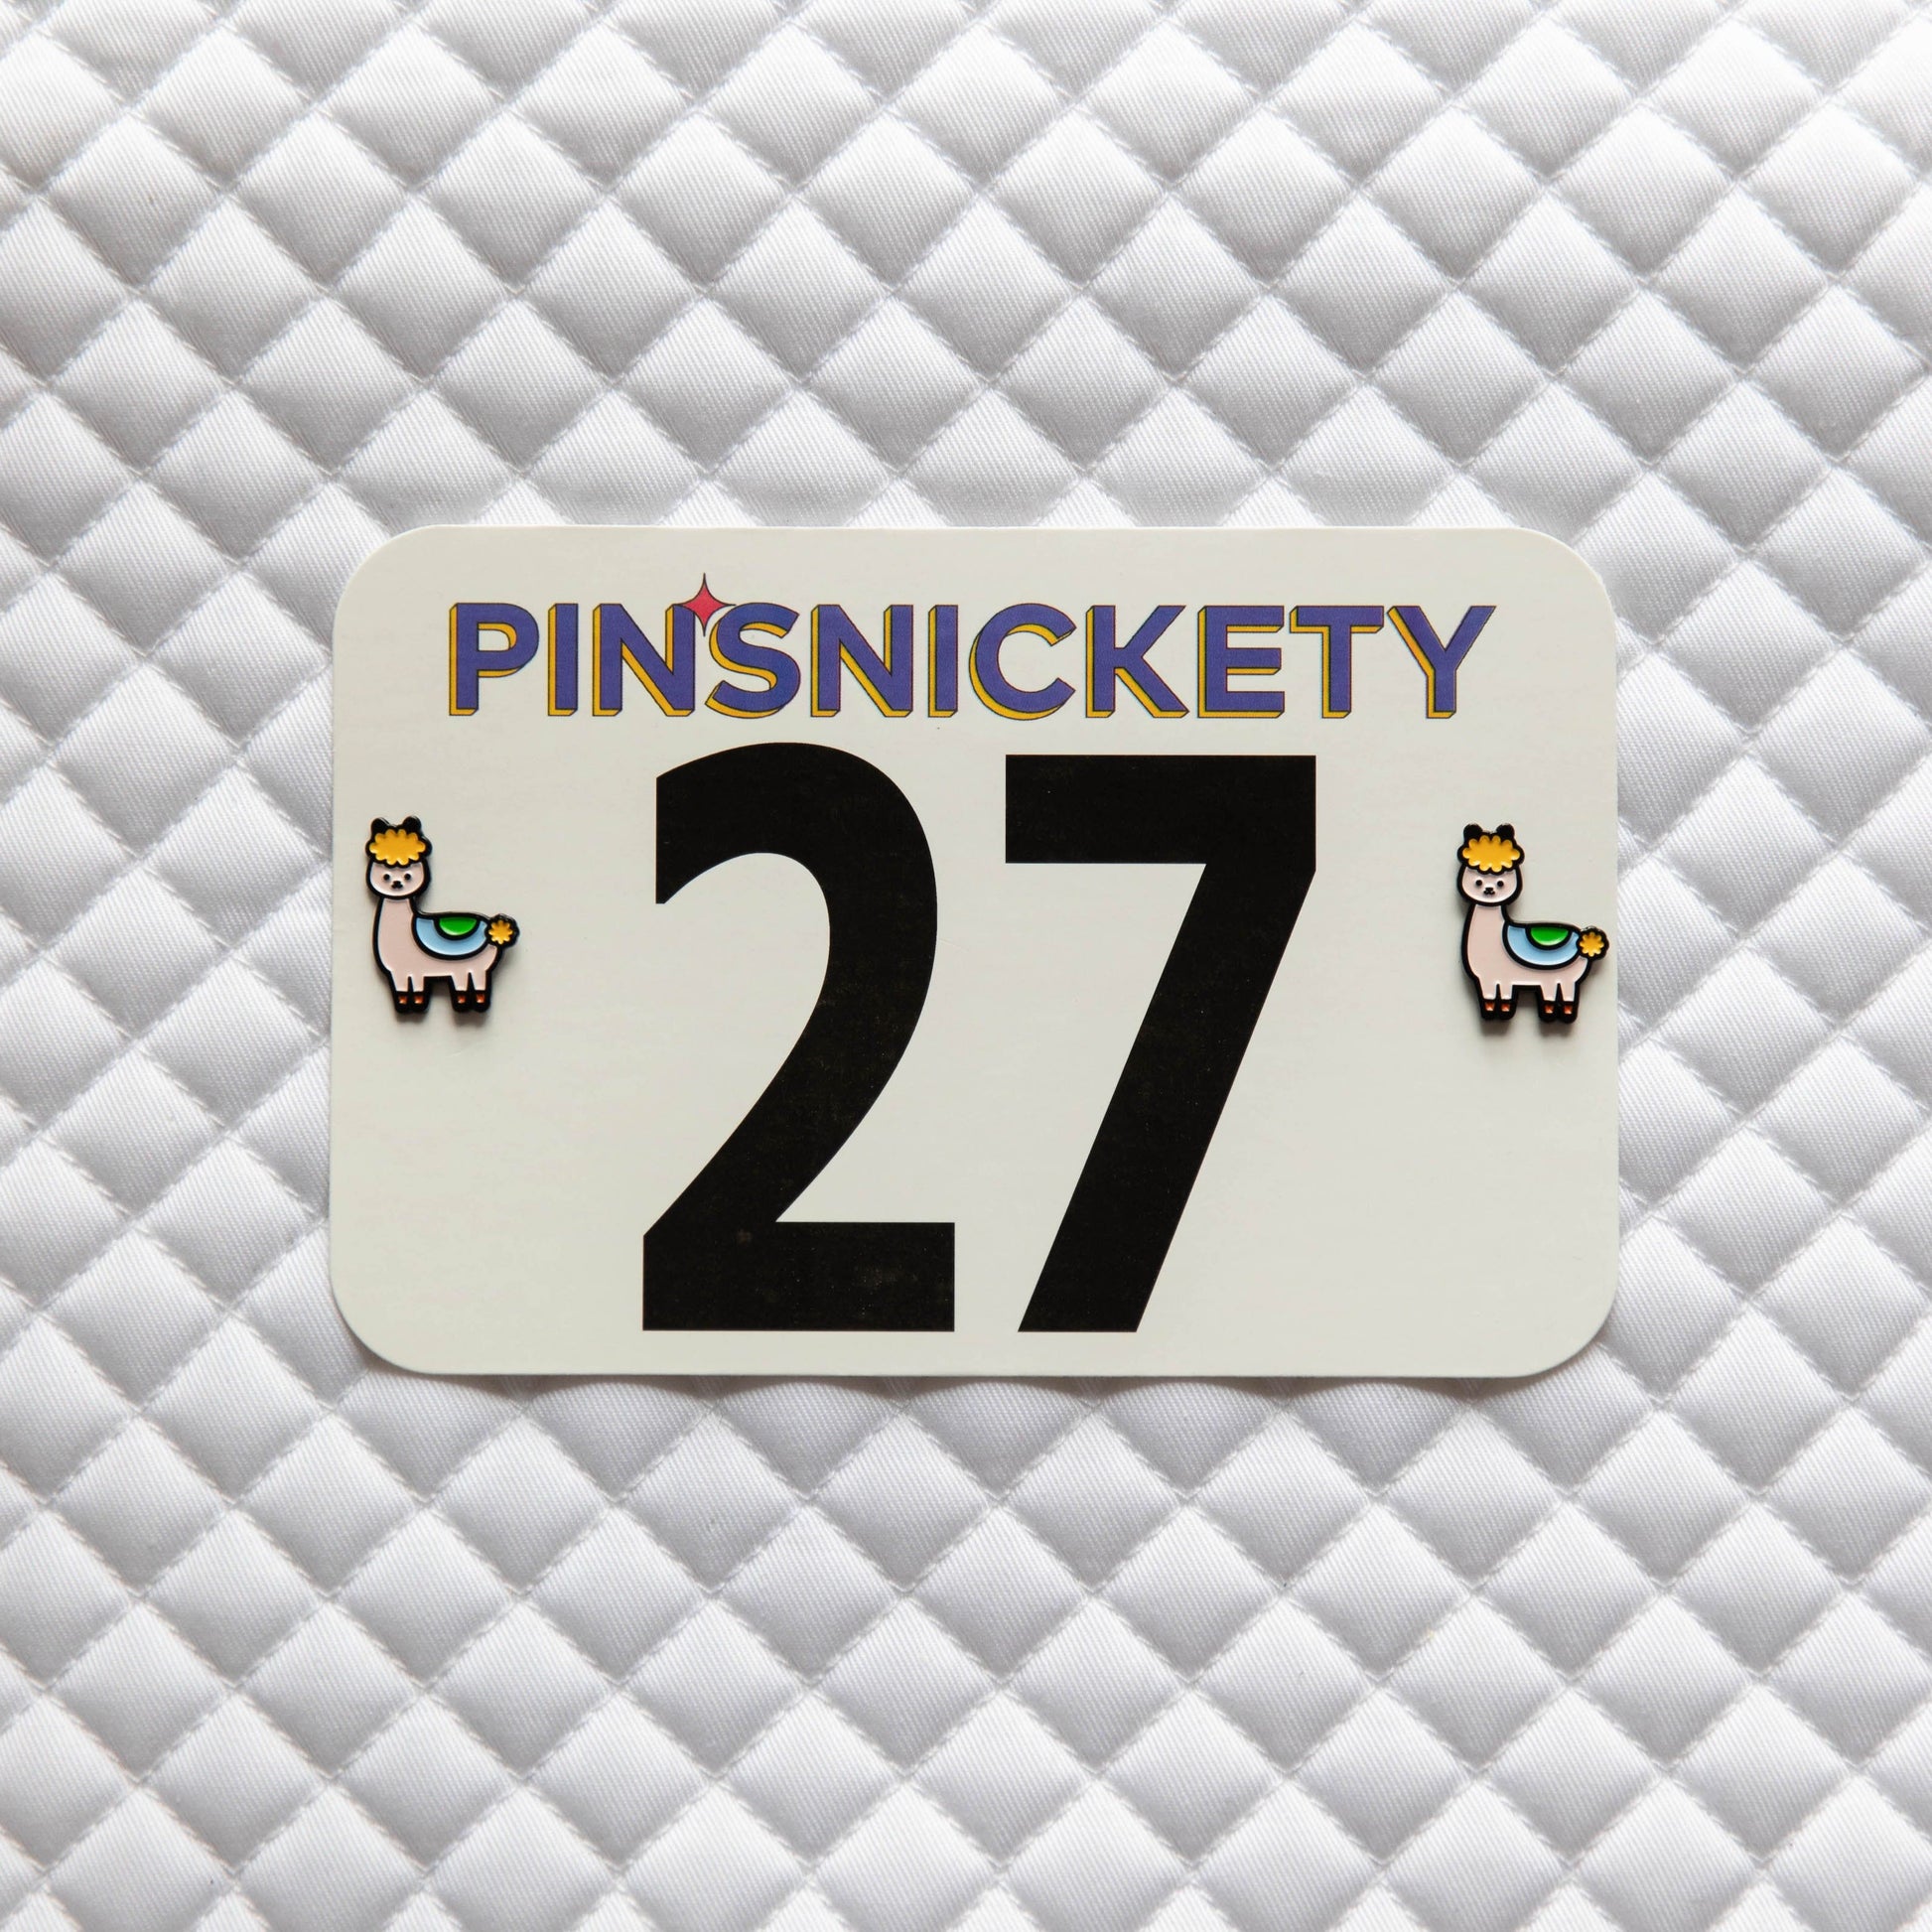 Pinsnickety Drama Llama horse show number pins on a saddle pad